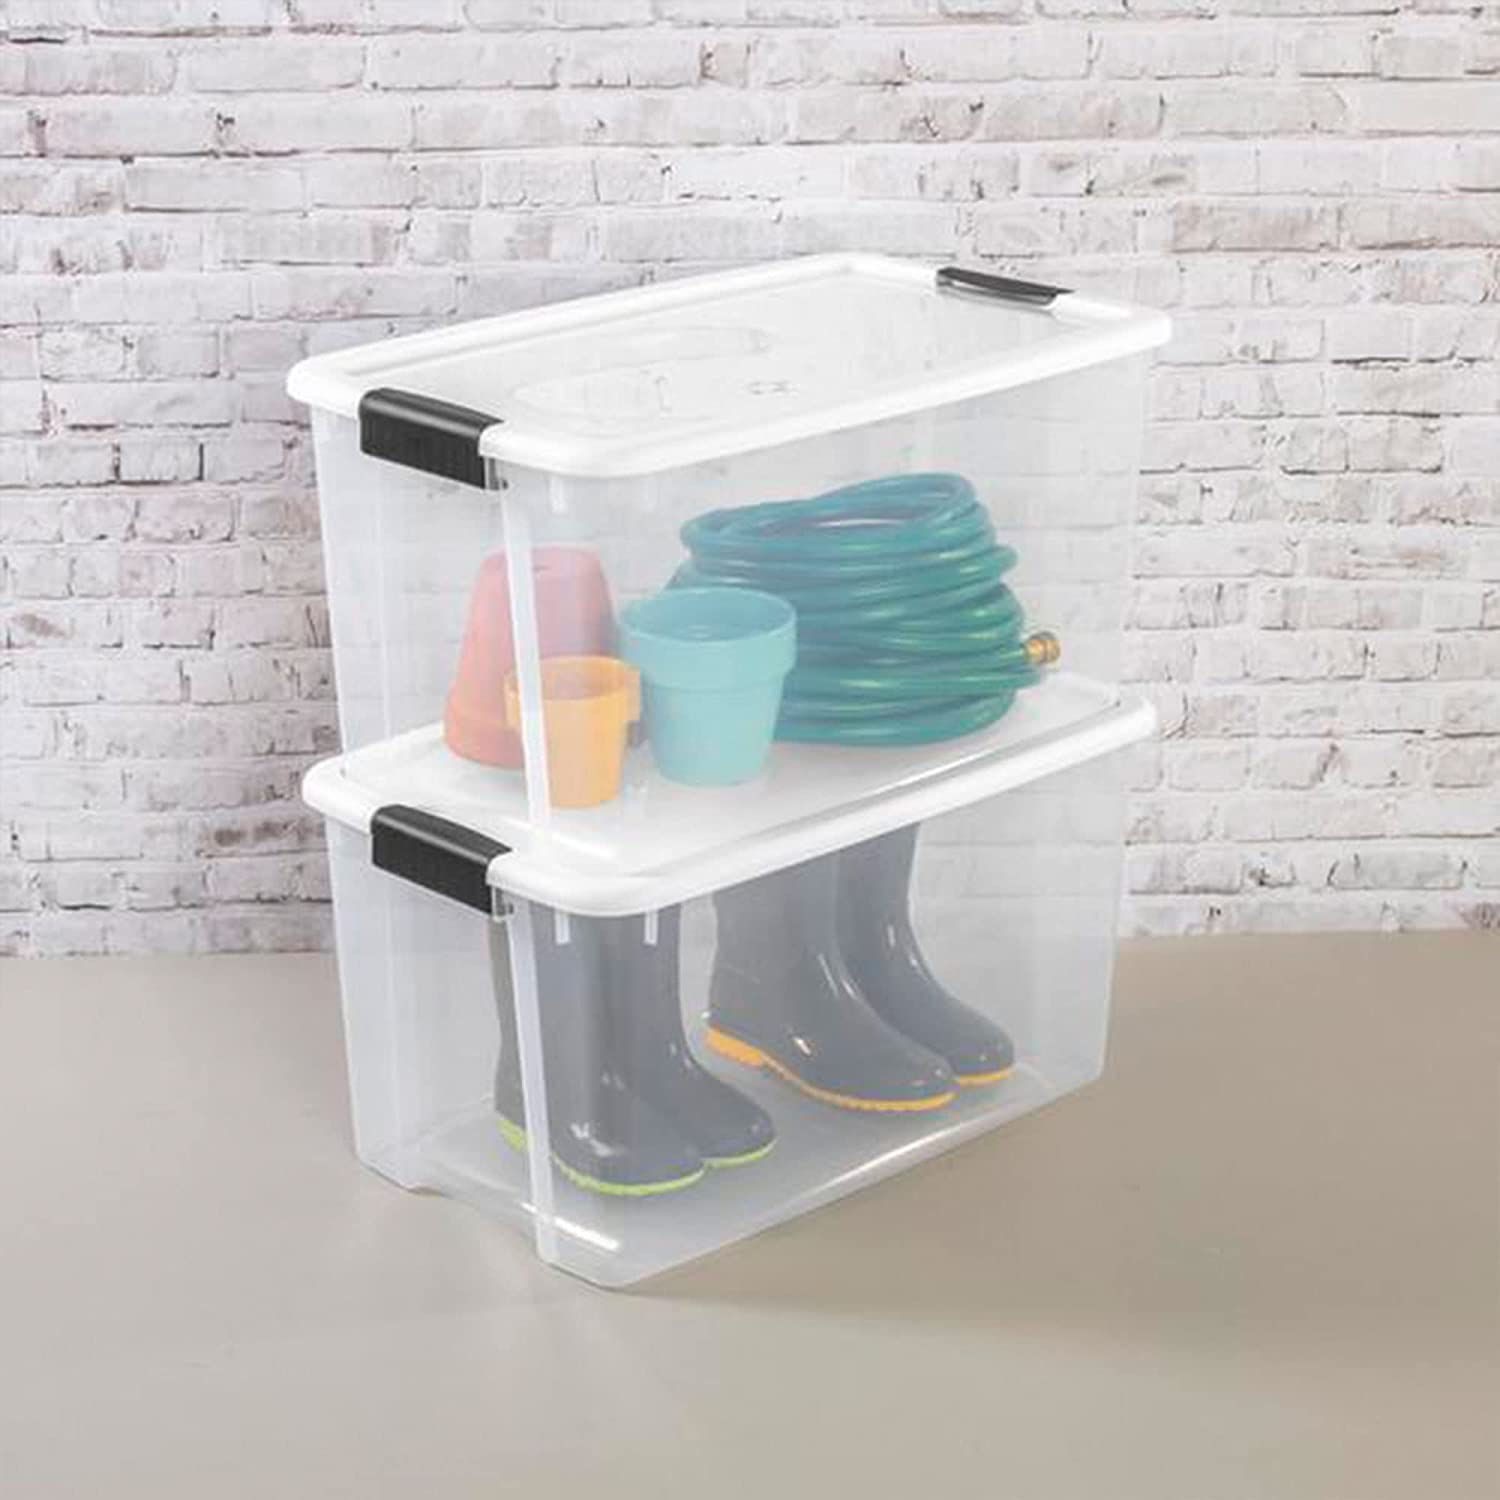 https://bigbigmart.com/wp-content/uploads/2023/06/Sterilite-70-Quart-Clear-Plastic-Stackable-Storage-Container-Bin-Box-Tote-with-White-Latching-Lid-Organizing-Solution-for-Home-Classroom-8-Pack8.jpg